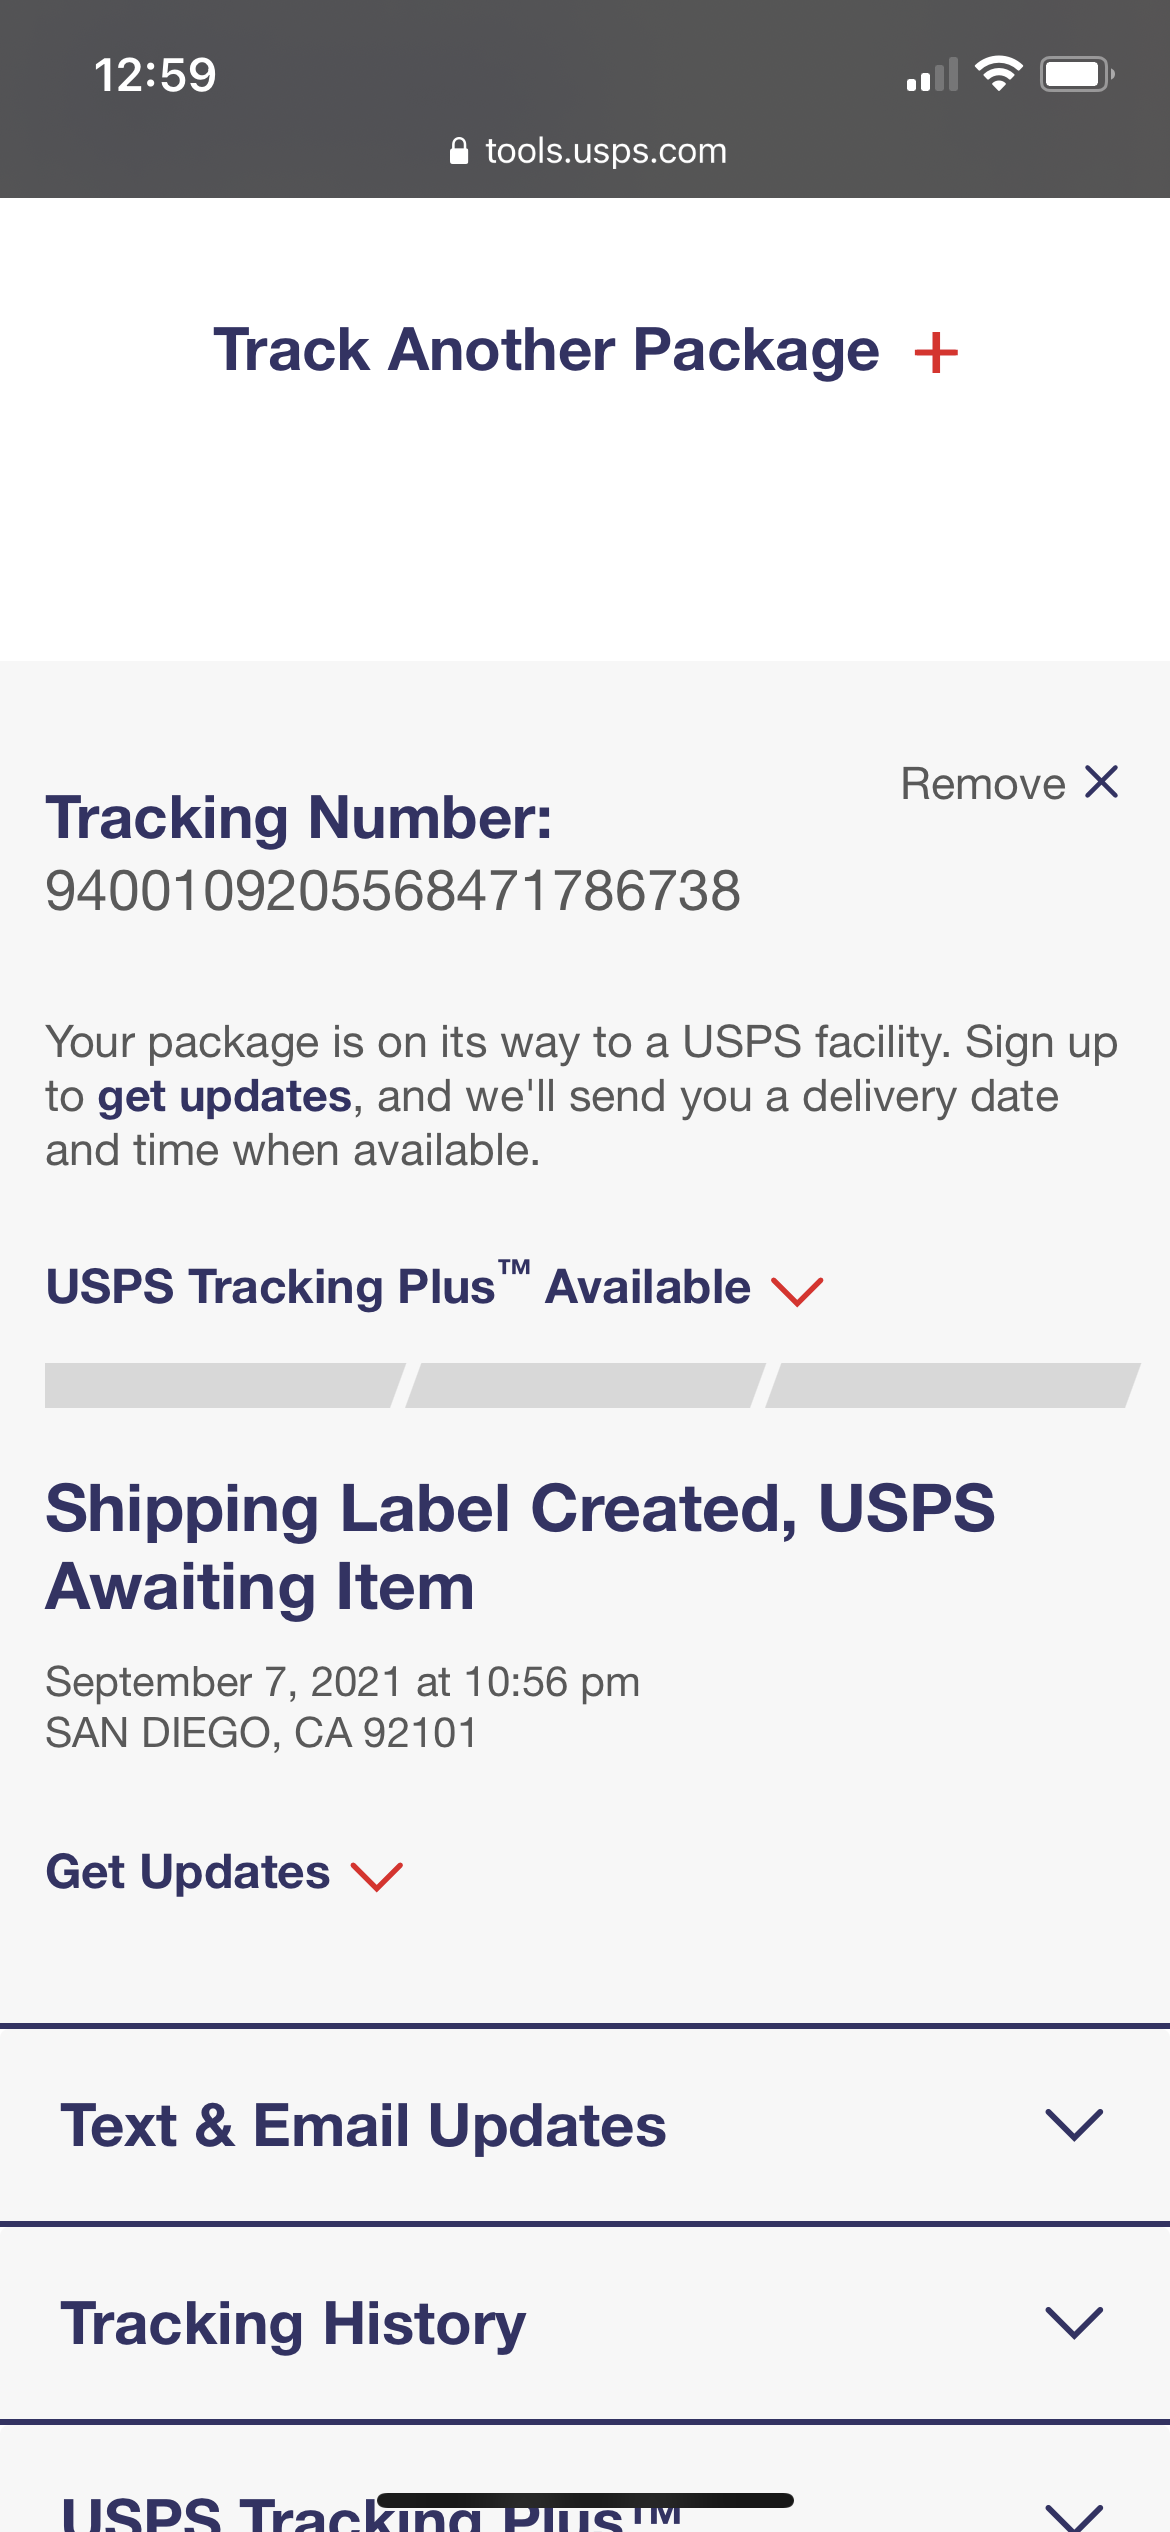 His bogus tracking number 